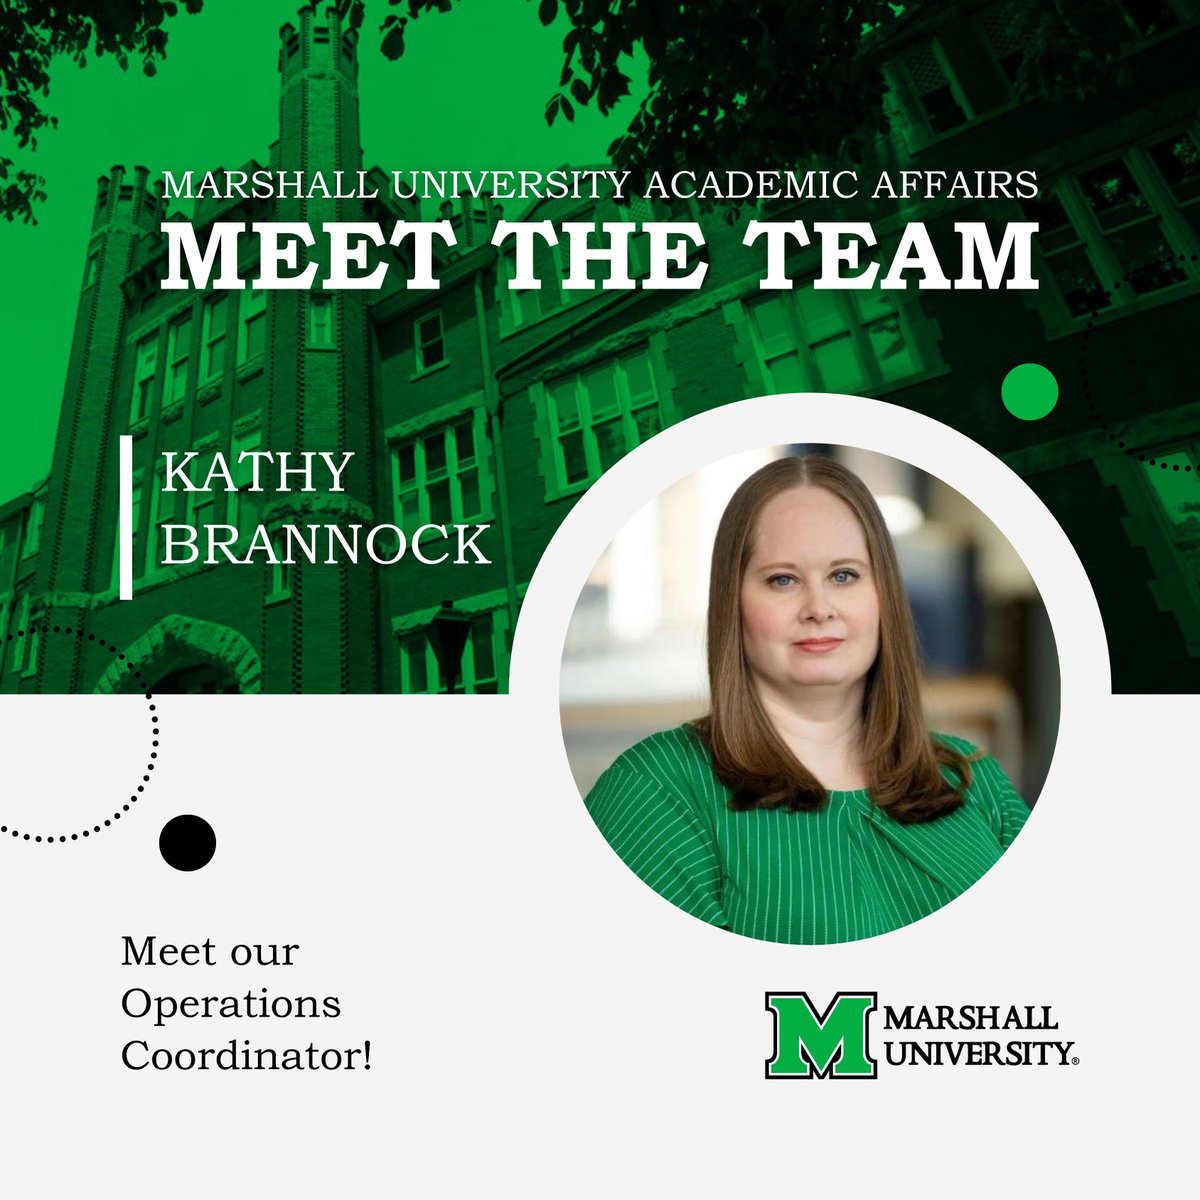 🌟 #MeettheTeamTuesday 🌟

Meet Kathy Brannock! Bio: rb.gy/s4f0a

Q&A Time! 💬
Night owl 🦉
Iced coffee ☕
Favorite jam? 🎵 Coldplay/U2
Dream travel destination? 🗼 Paris
Book recommendation? 📚 The Great Gatsby

Stay tuned for more from our amazing @marshallu team!